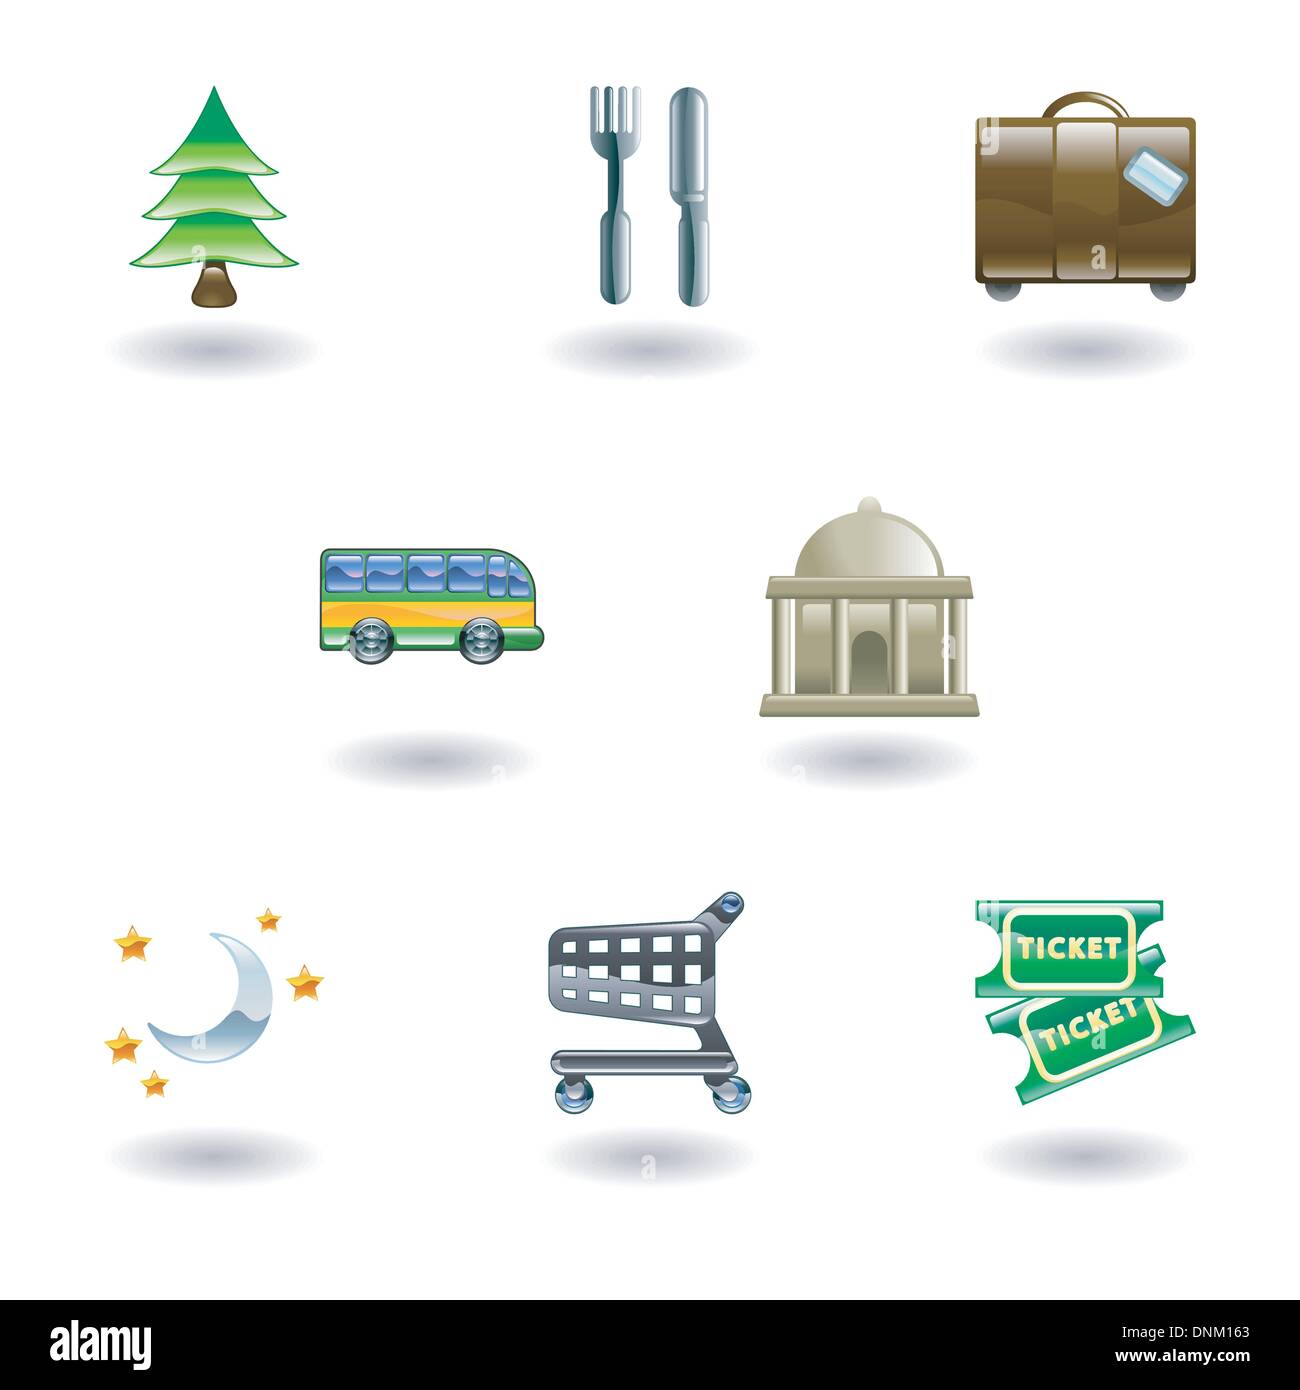 Tourist locations icon set Icon set relating to city or location information for tourist web sites or maps etc. Stock Vector